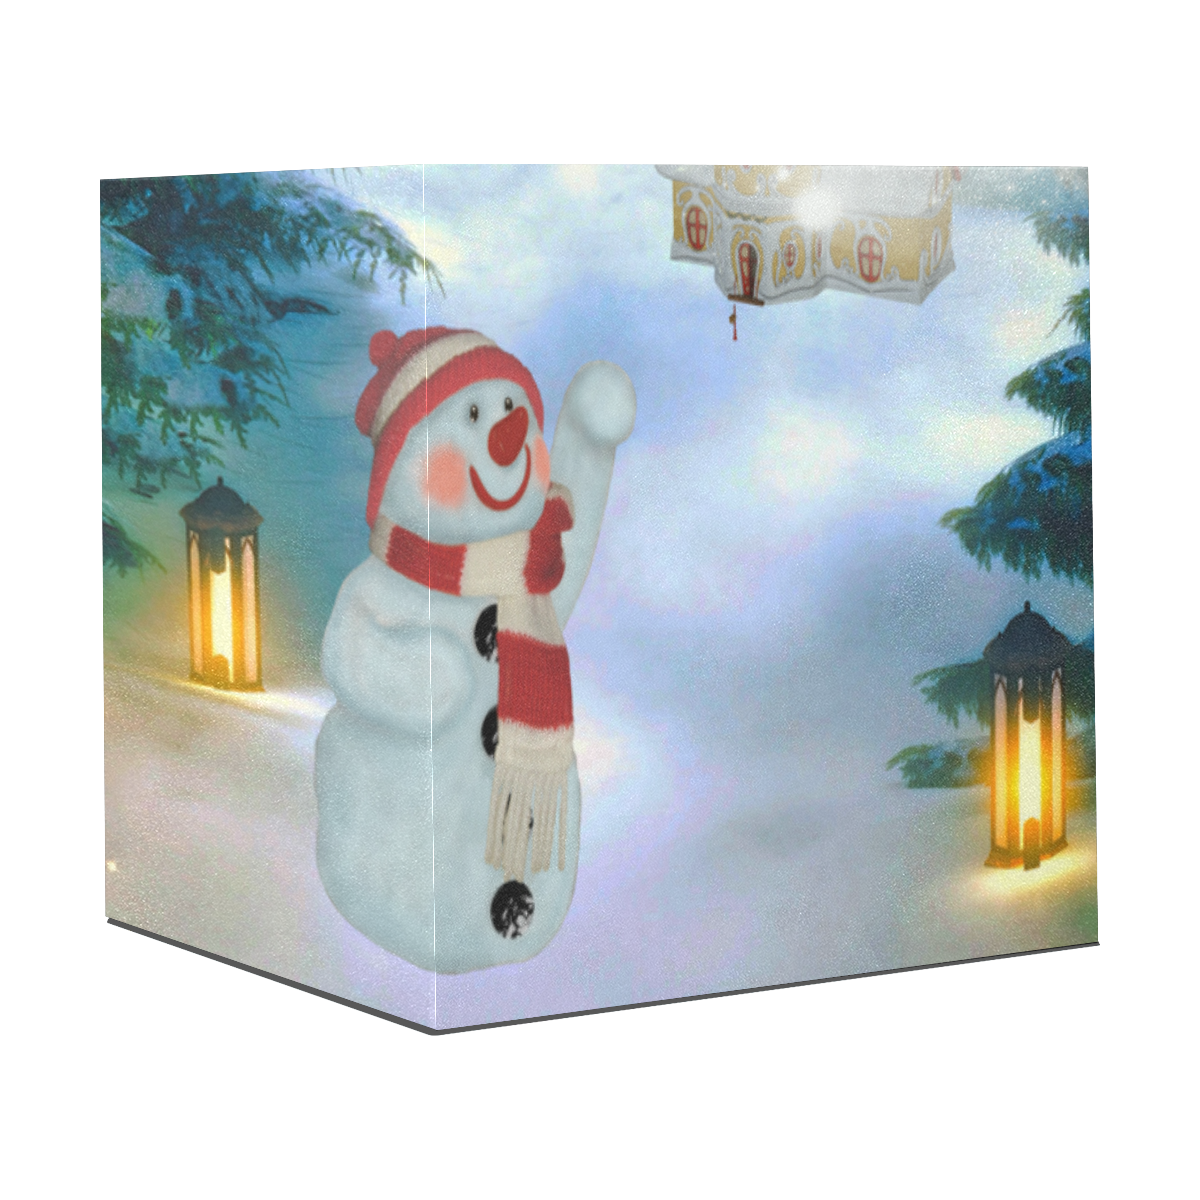 Santa Claus in the night Gift Wrapping Paper 58"x 23" (2 Rolls)